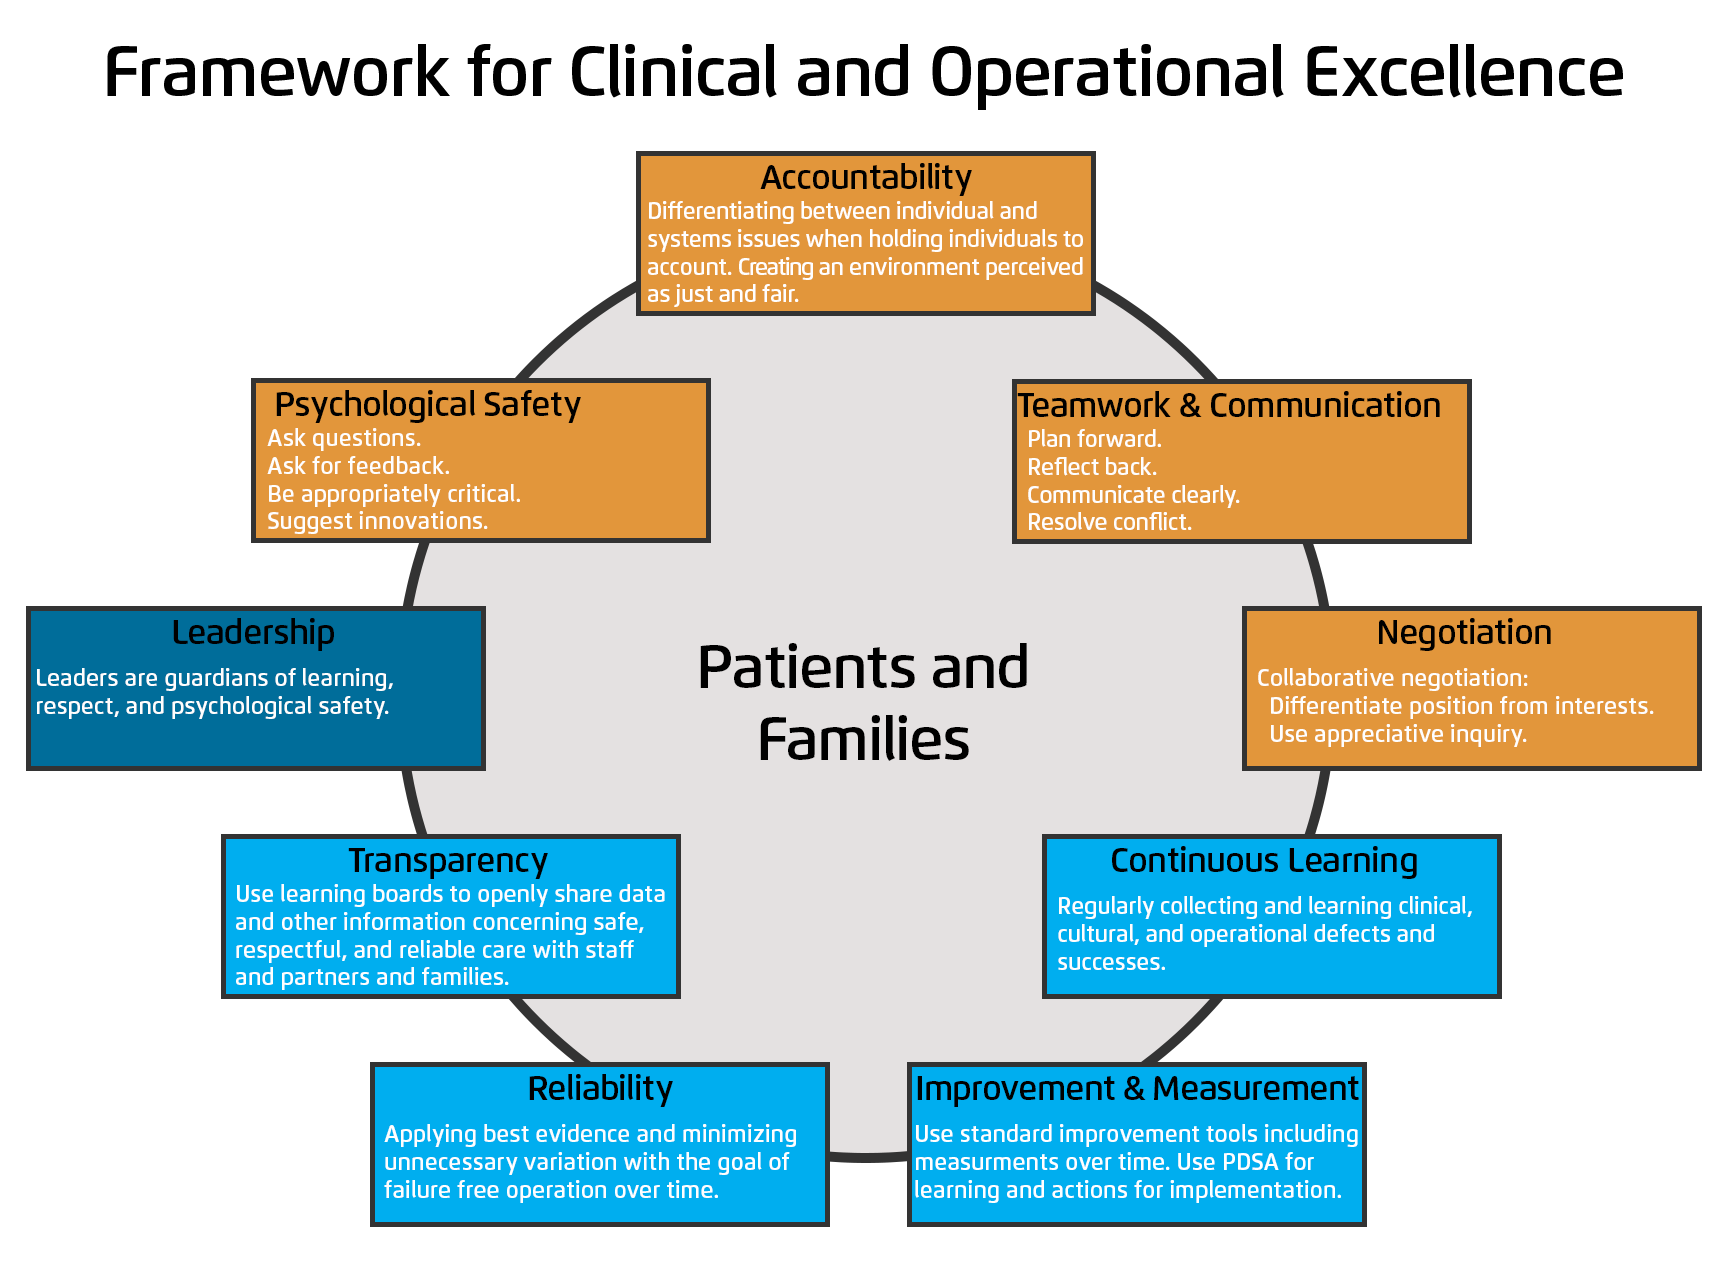 The Framework for Clinical and Operational Excellence